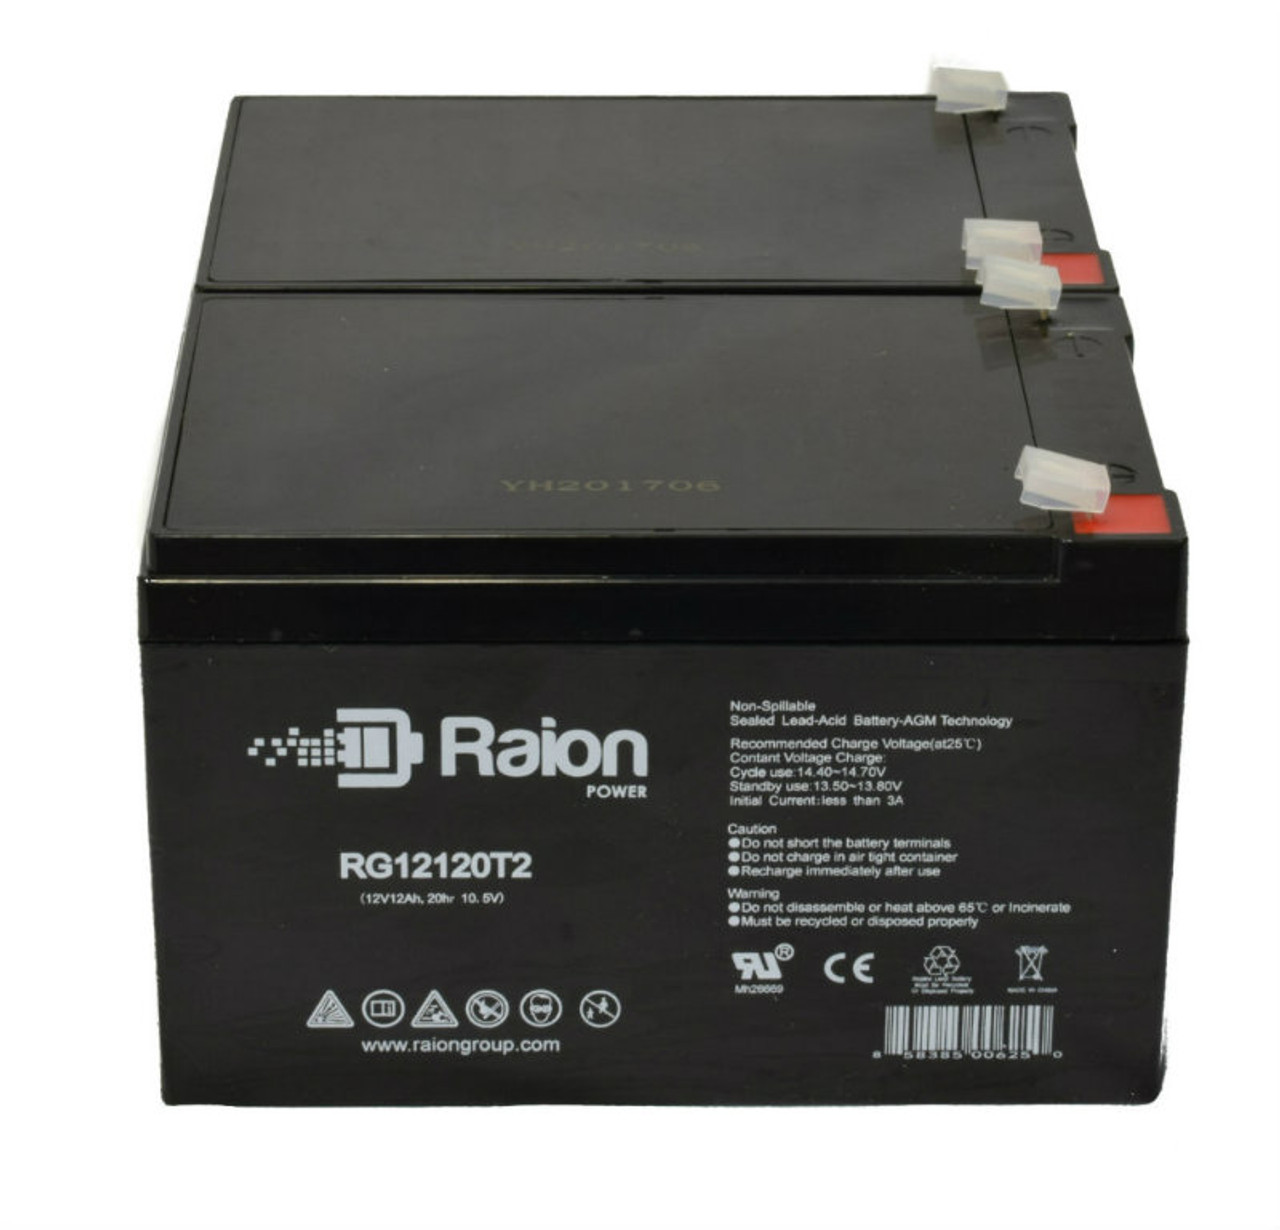 Raion Power RG12120T2 12V 12Ah Replacement UPS Battery for APC Smart-UPS 1000VA LCD SMT1000 - 2 Pack